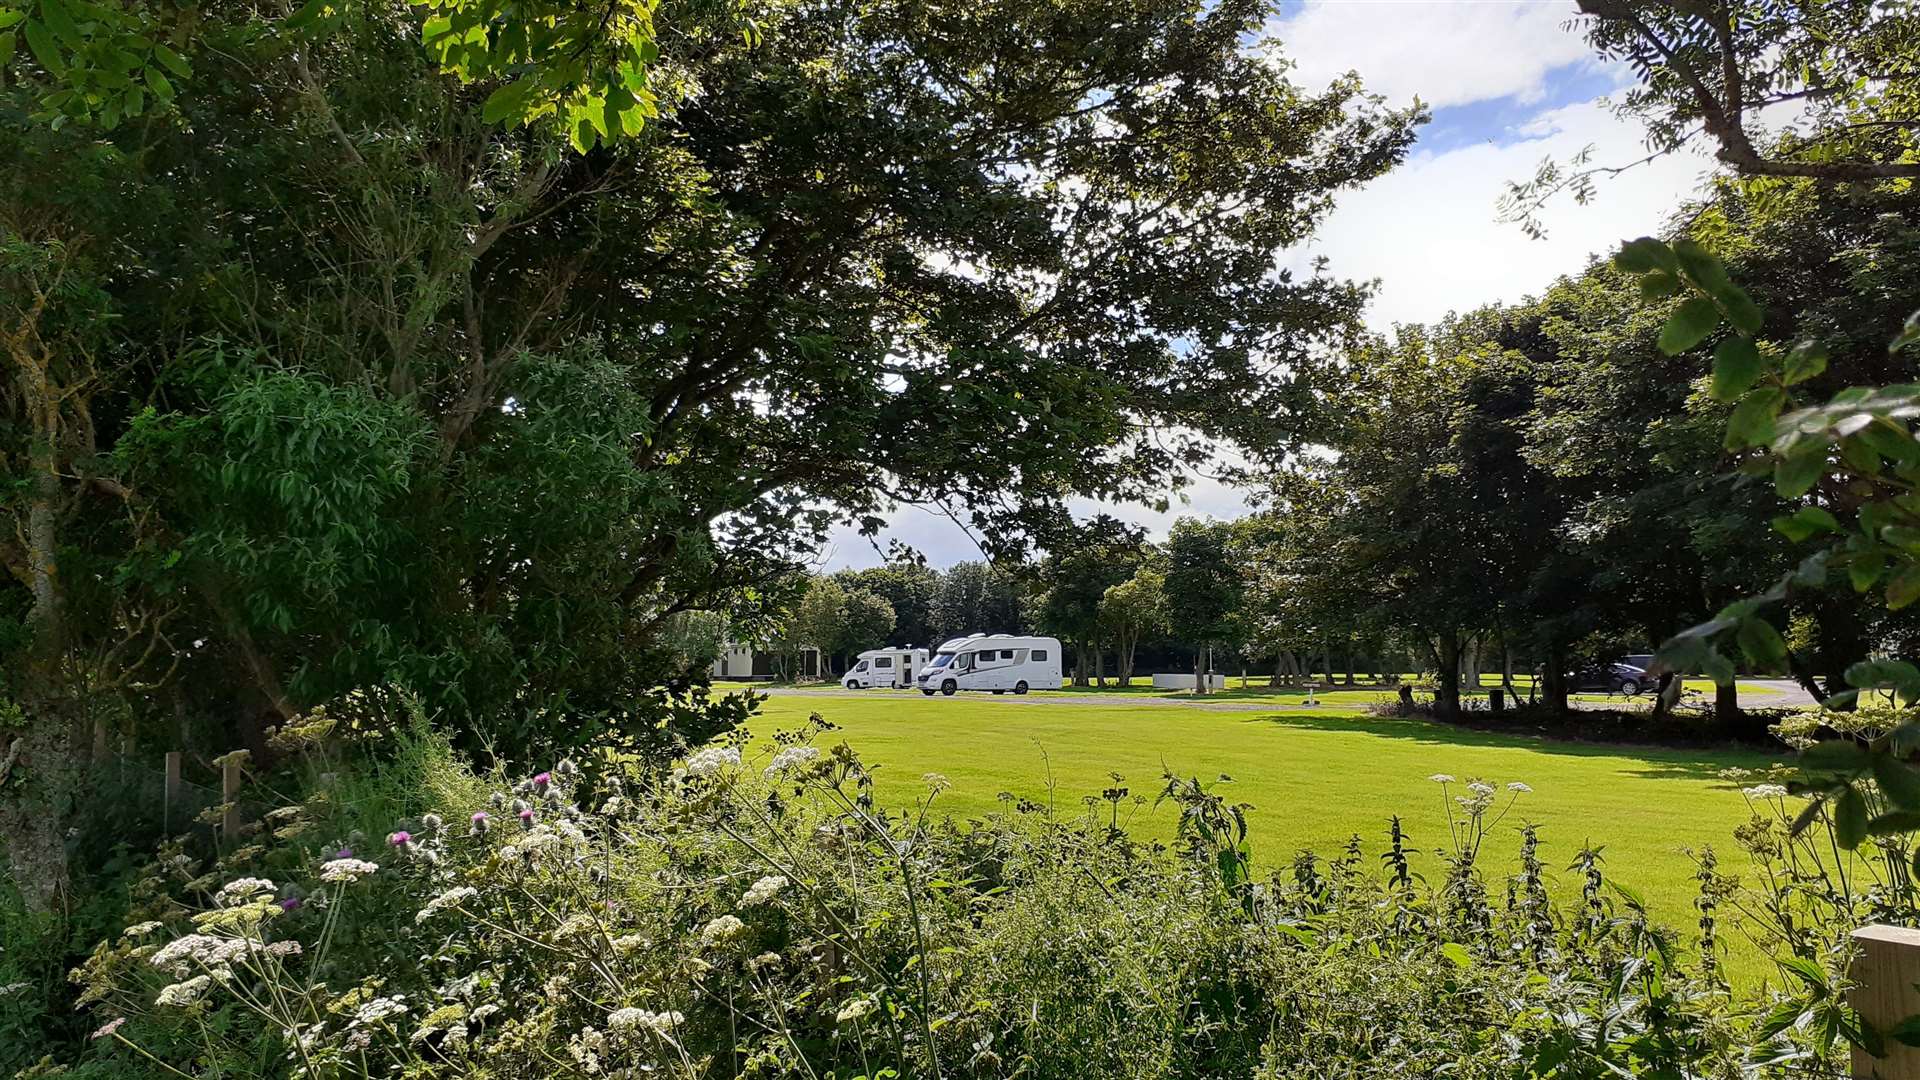 Wick caravan and camping site was leased from Highland Council by local couple Tricia and William Miller.